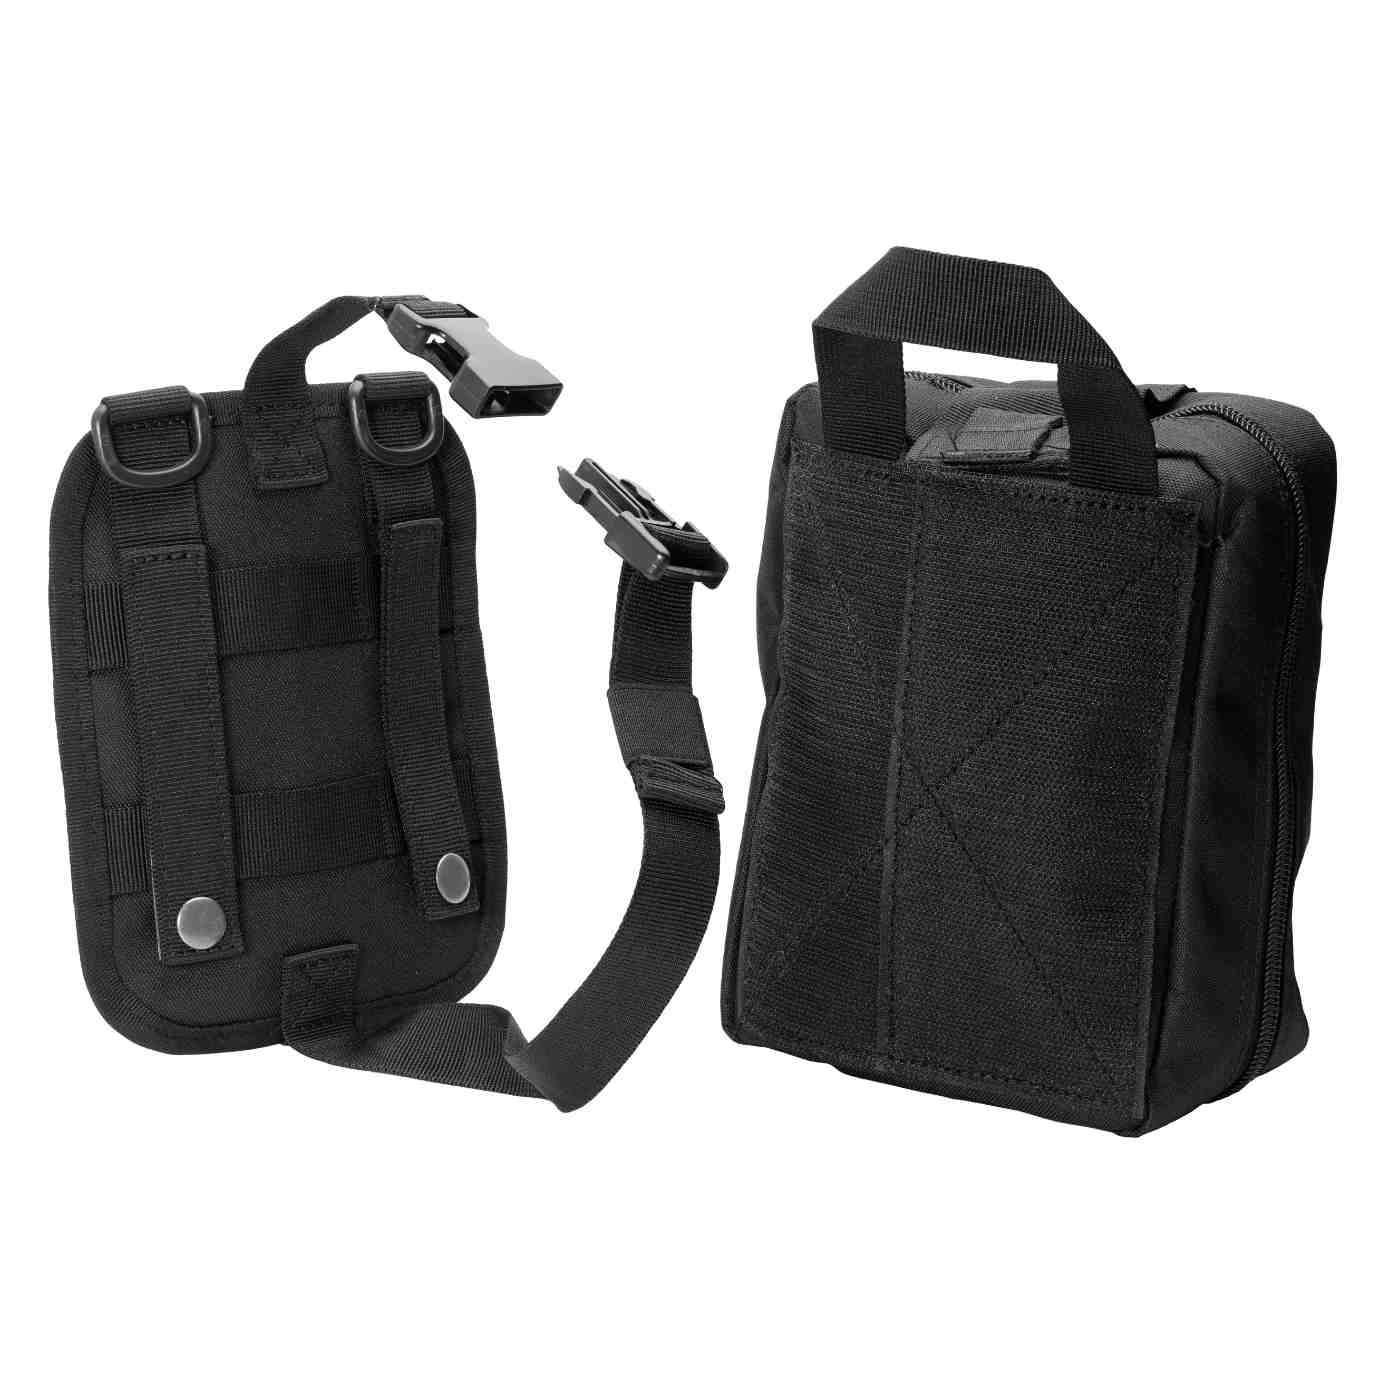 MOLLE Bag Trauma Kit 2.0 - Black one kit showing clip mechanism next to kit with Velcro panel showing